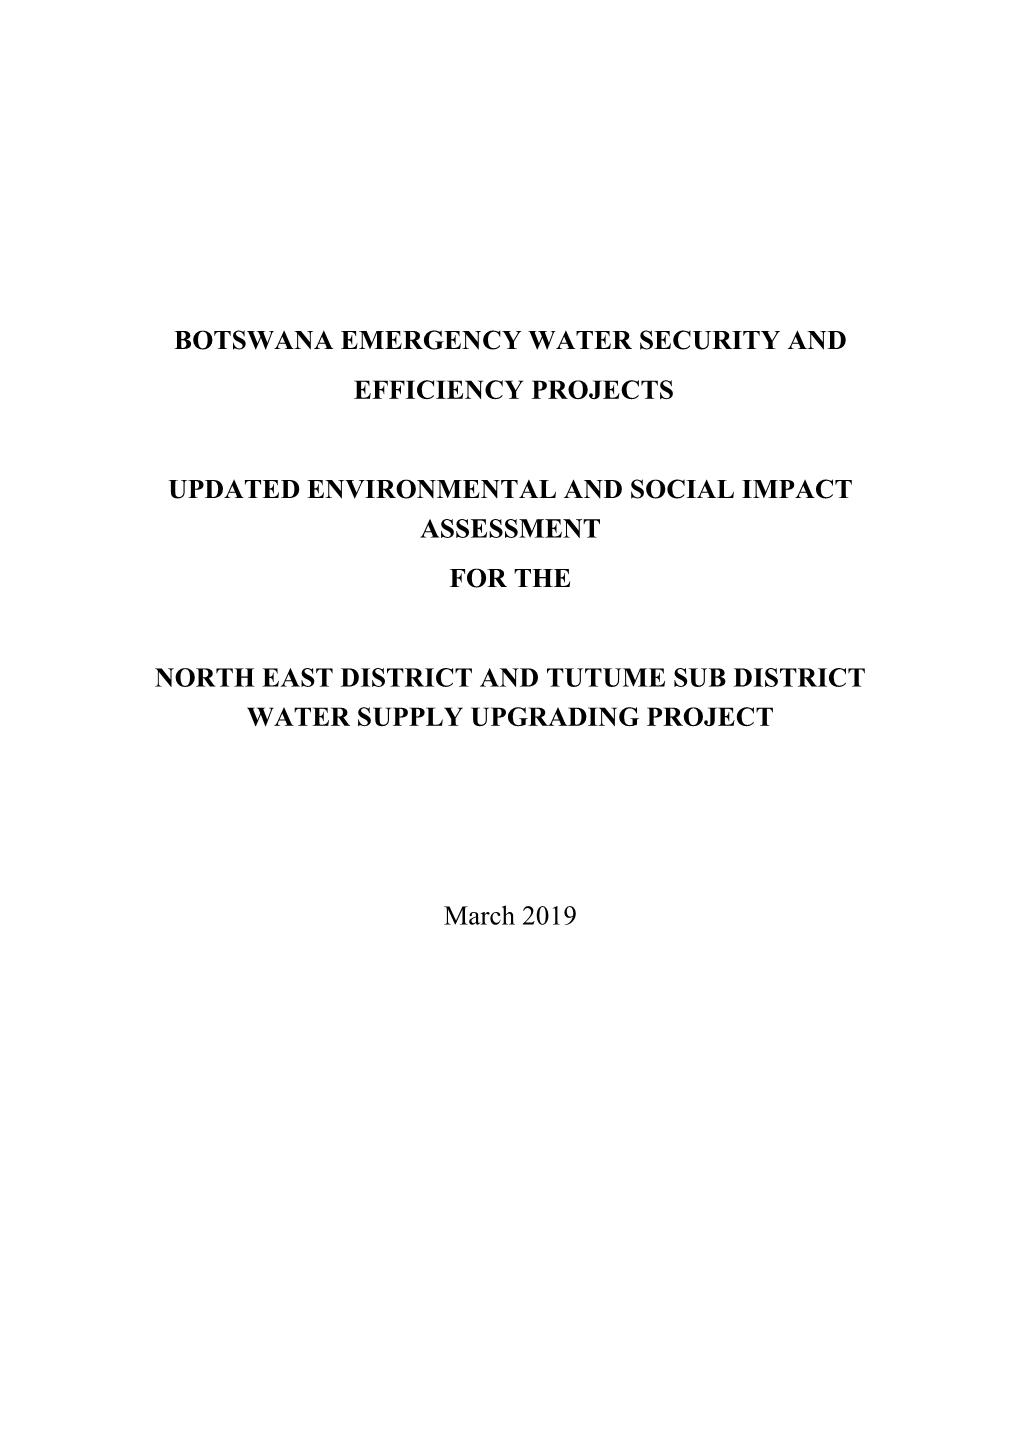 Botswana Emergency Water Security and Efficiency Projects